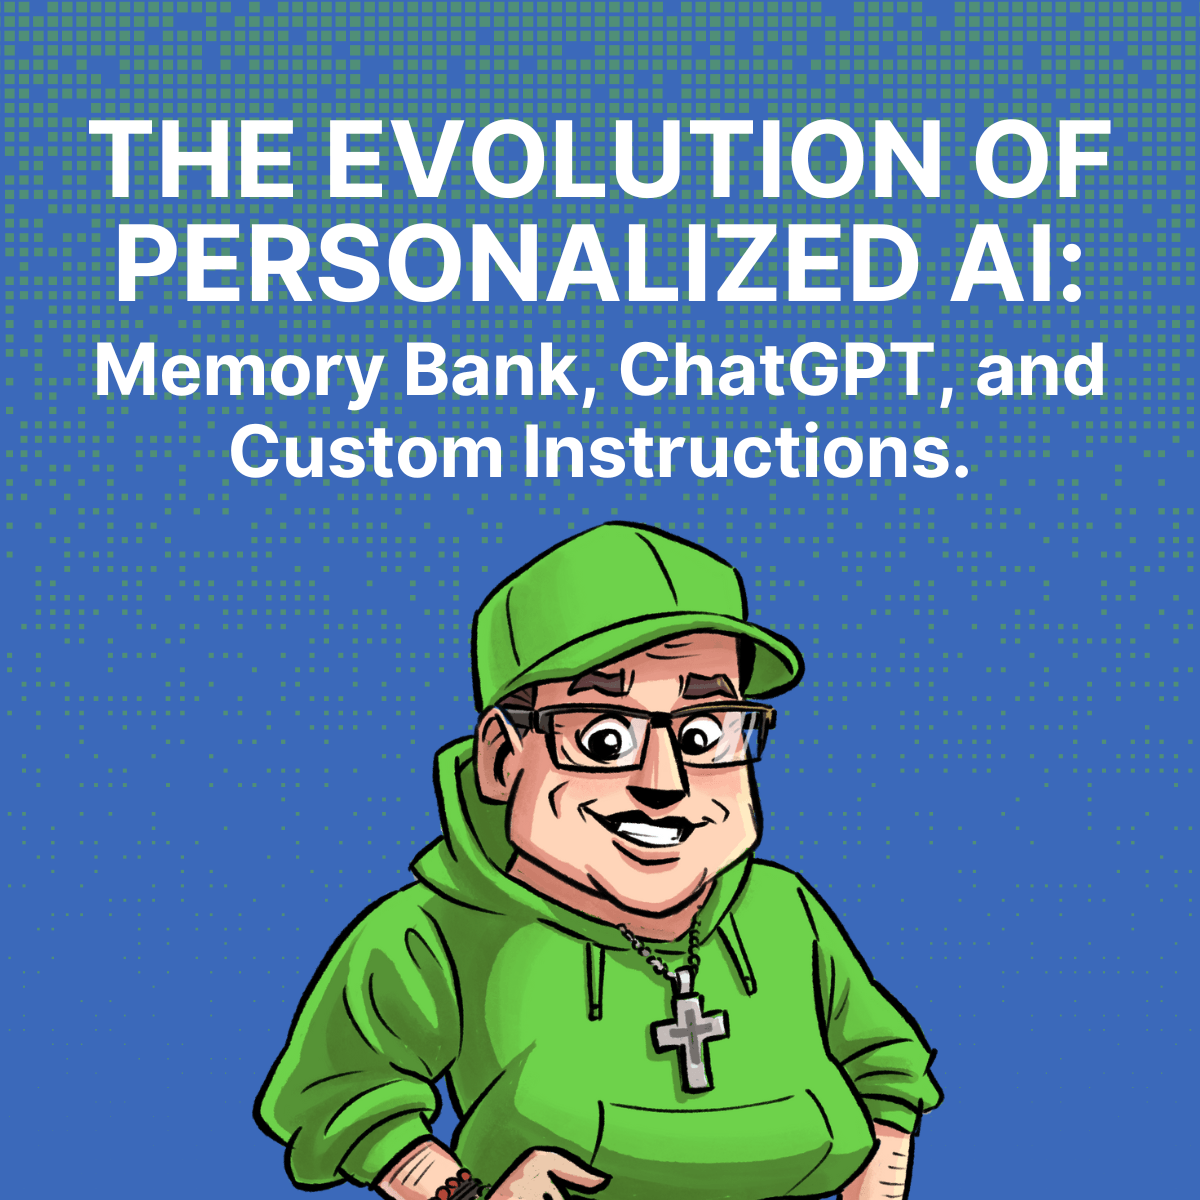 The Evolution of Personalized AI: Memory Bank, ChatGPT, Custom Instructions and George b. Thomas